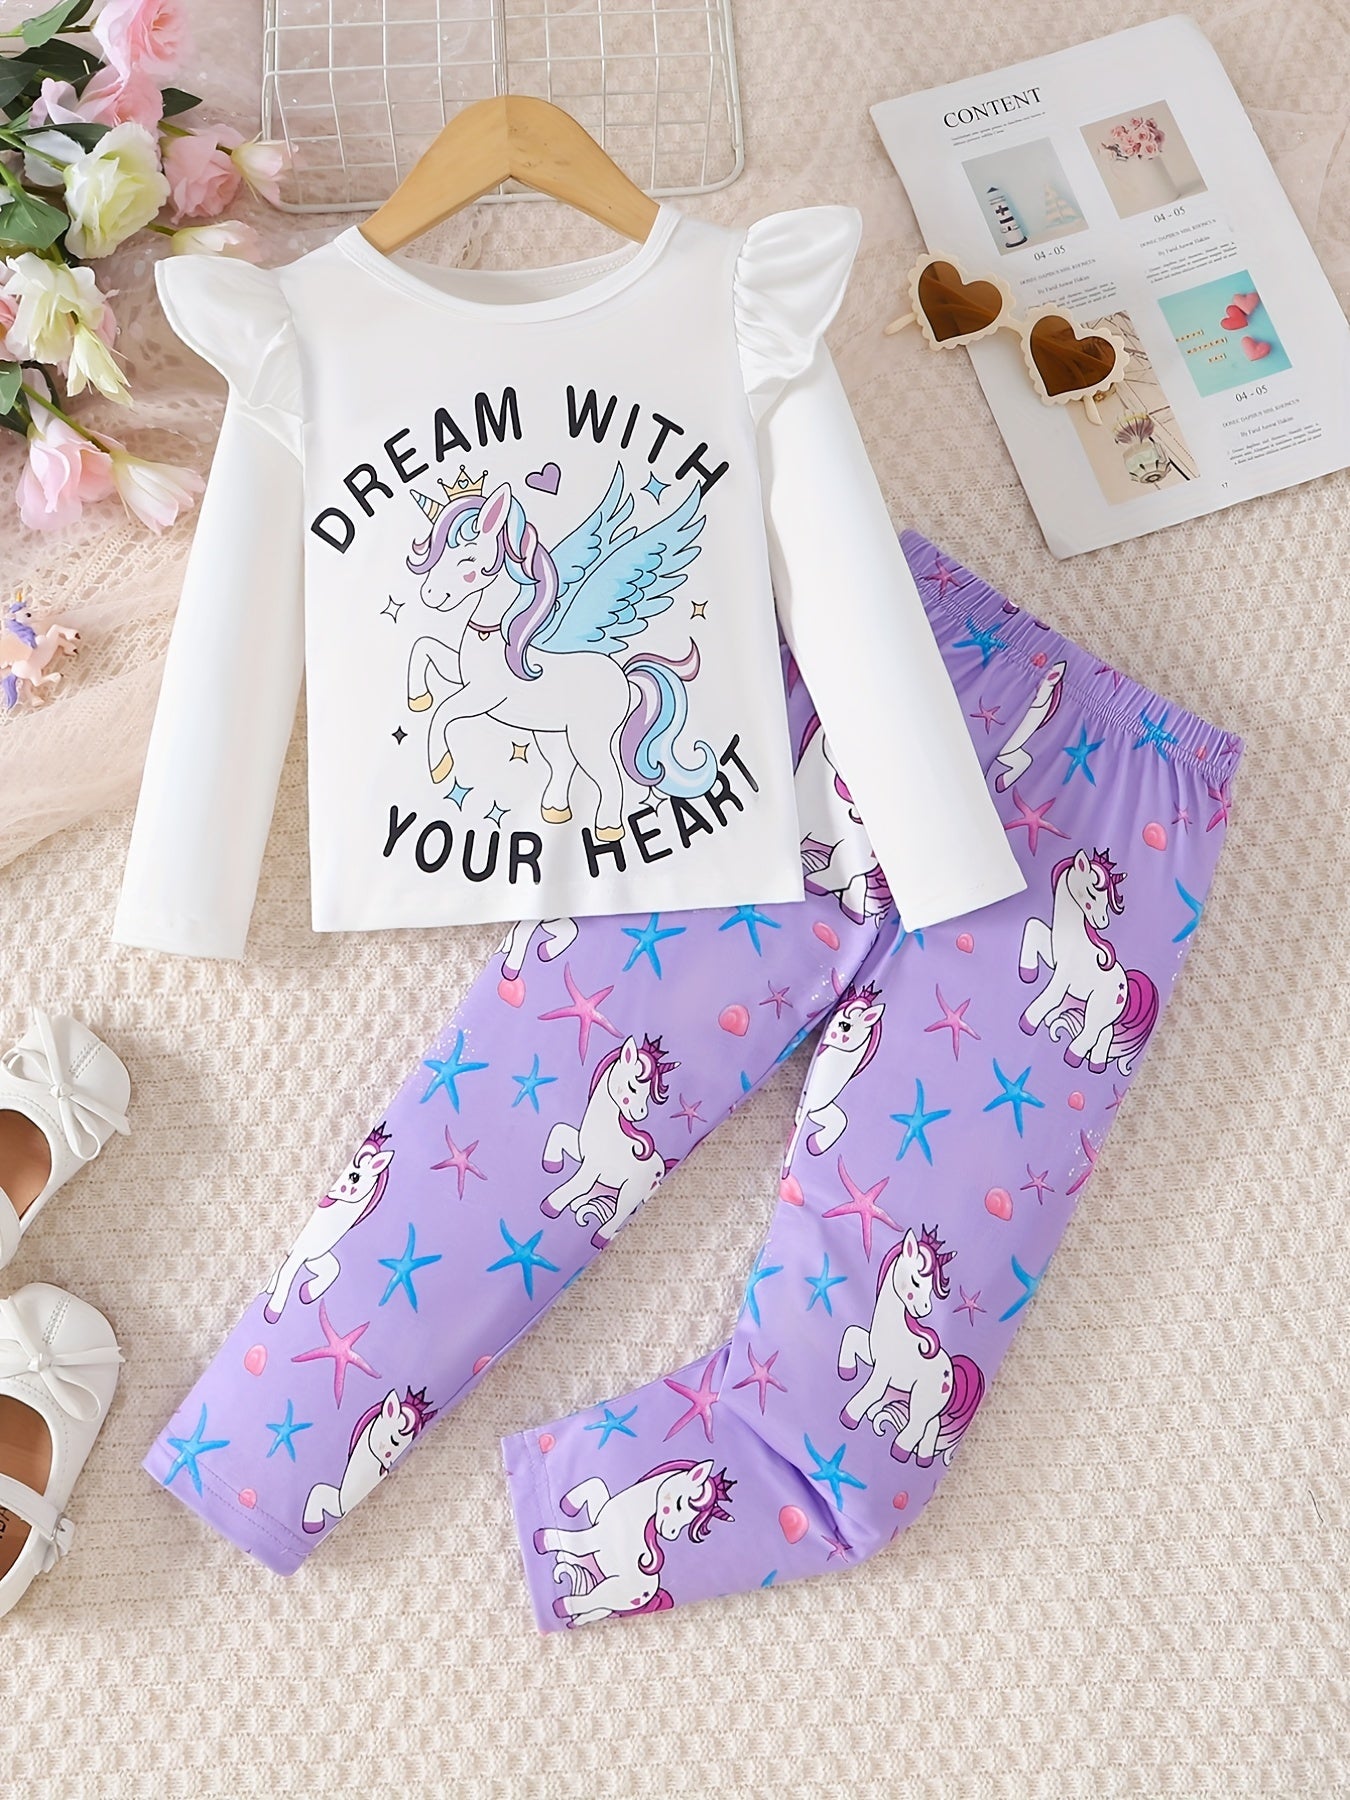 Toddler Girl's 2pcs, Long Sleeve Top & Pants Set, Unicorn Starfish Print Ruffle Decor Casual Outfits, Kids Clothes For Spring Fall